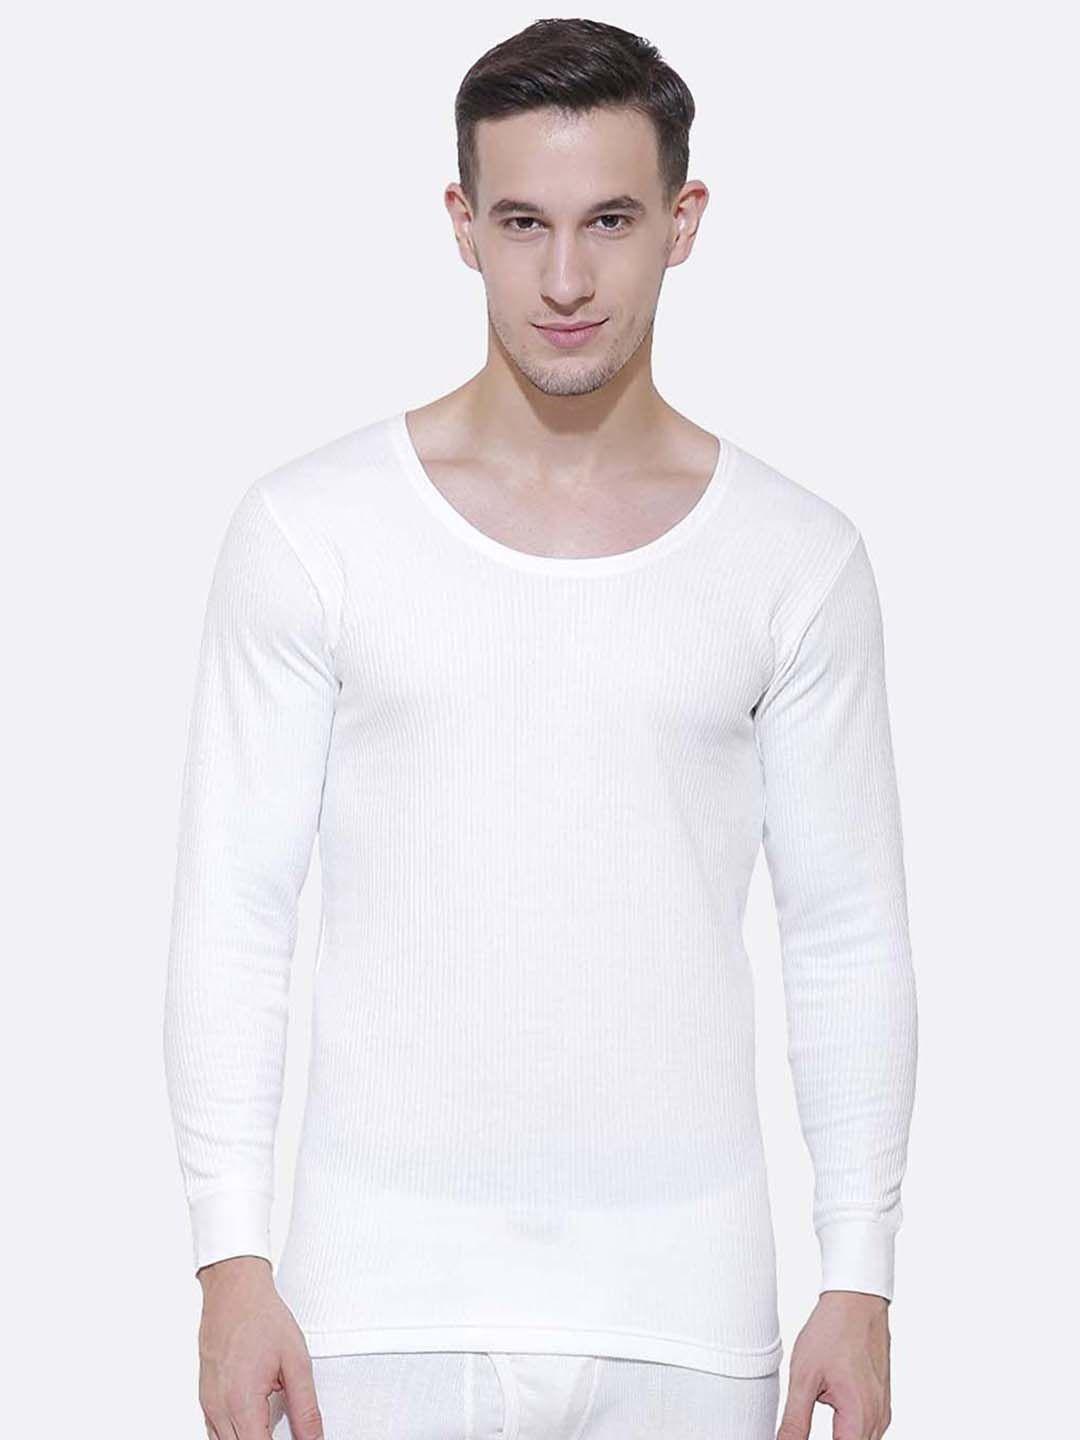 bodycare insider men solid round neck full sleeves cotton thermal top